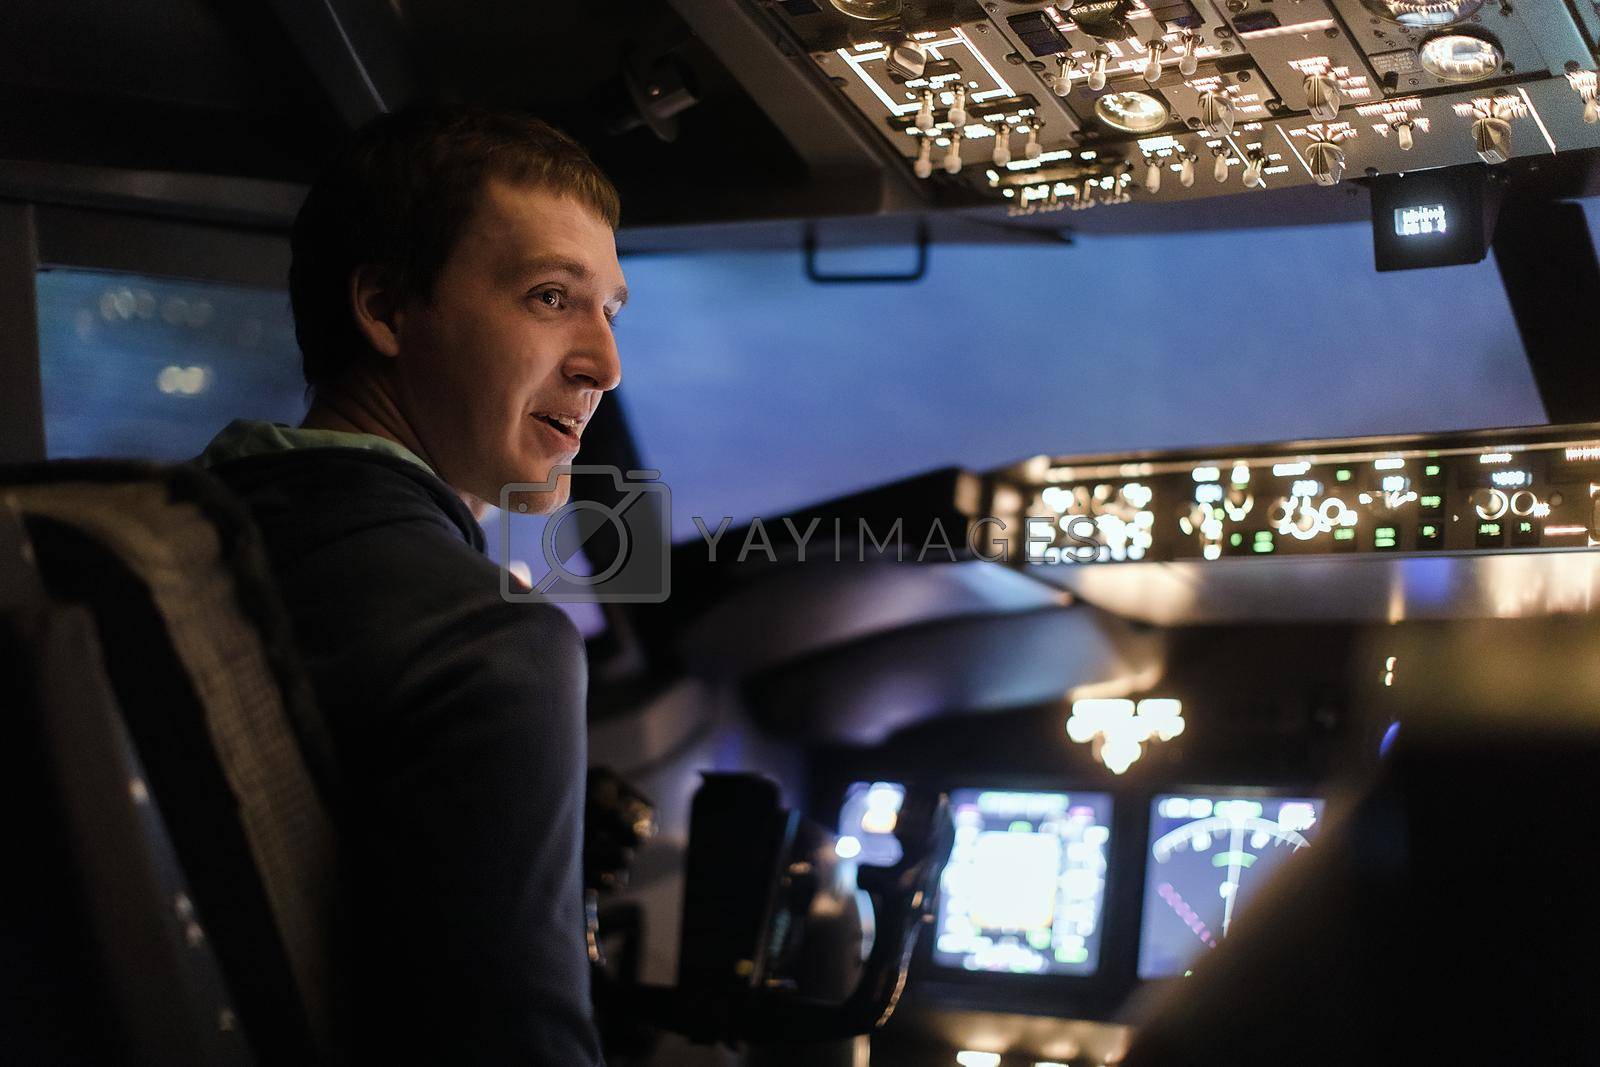 Young man piloting a plane in flight simulator for the training of the pilots